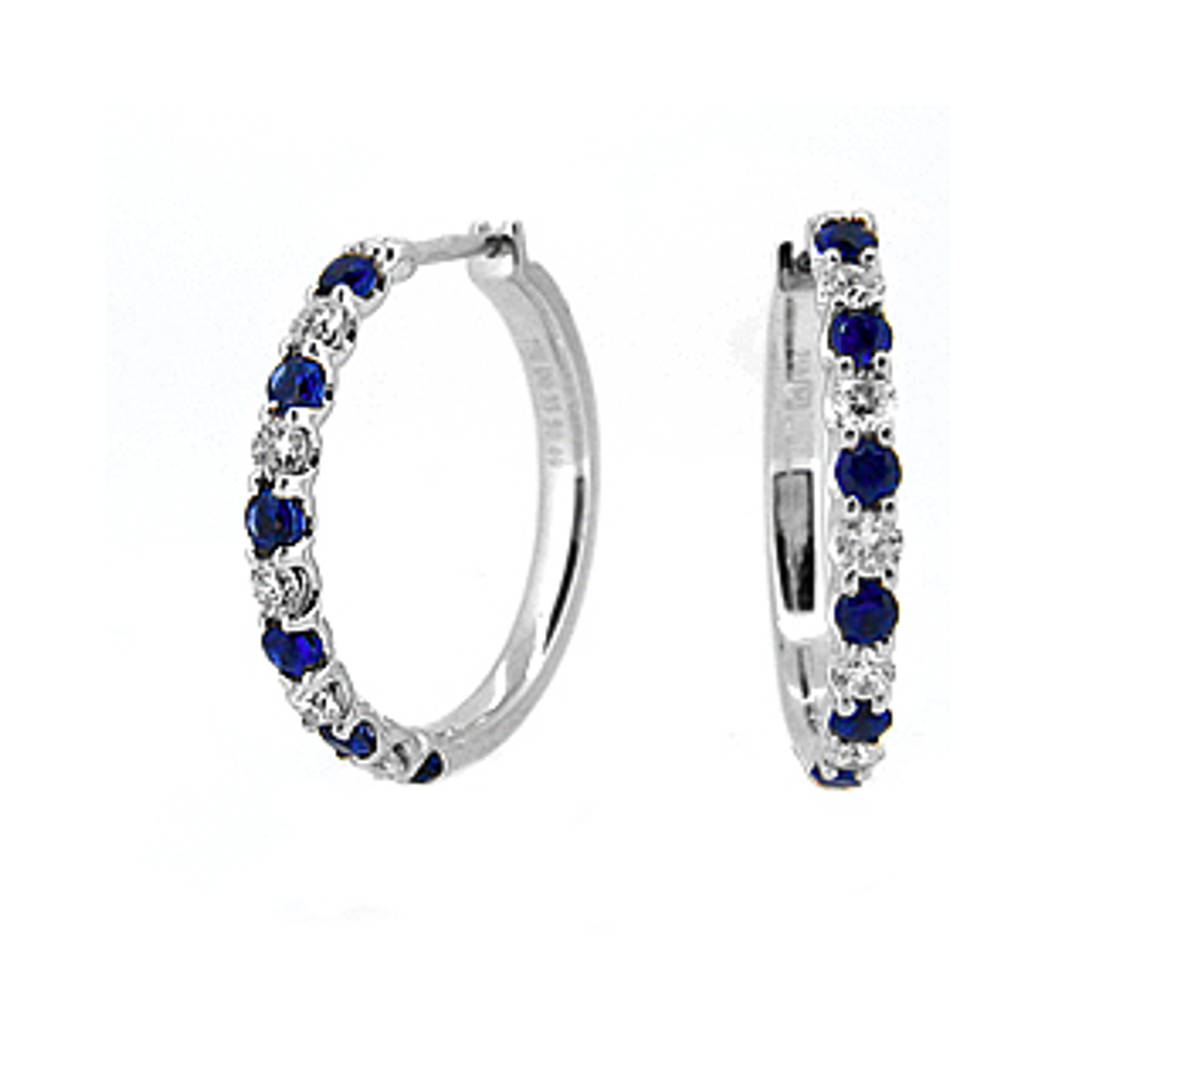 SAPPHIRE AND DIAMOND HOOP EARRINGSAvailable in: 18k white gold, 18k yellow goldPictured item: 0.33ct diamonds/0.49ct sapphire set in 18k white gold